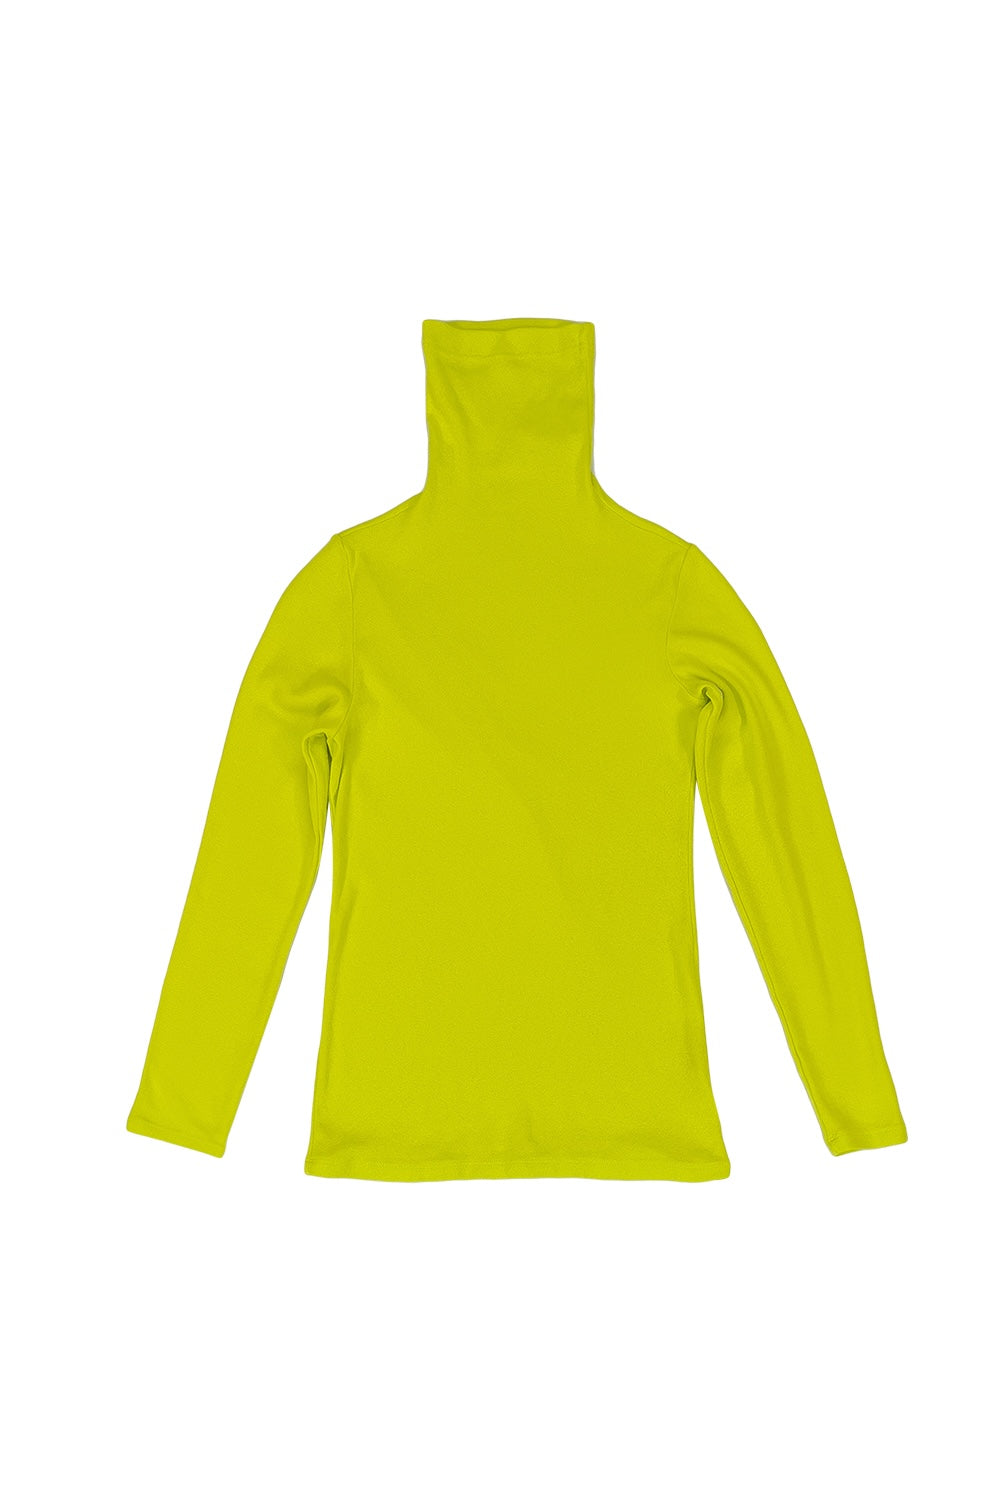 Whidbey Turtleneck | Jungmaven Hemp Clothing & Accessories / Color: Limelight